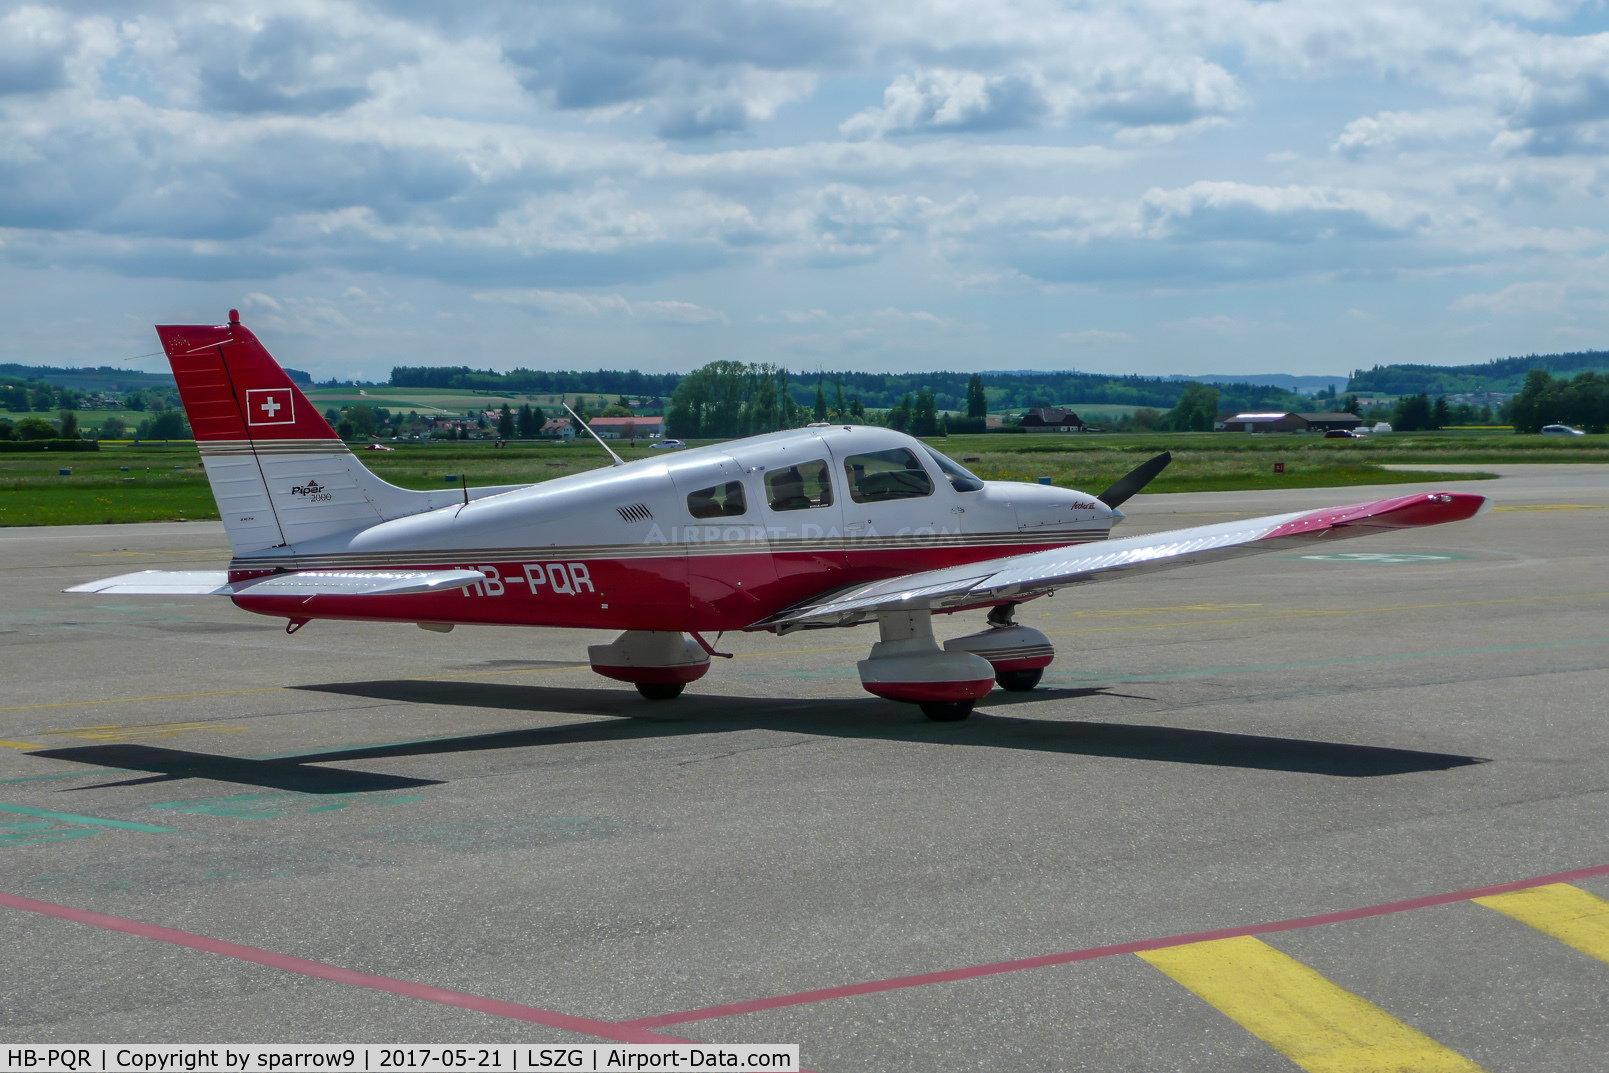 HB-PQR, 2000 Piper PA-28-181 Archer III C/N 2843363, At Grenchen. HB-registered sinc 2004-12-16.